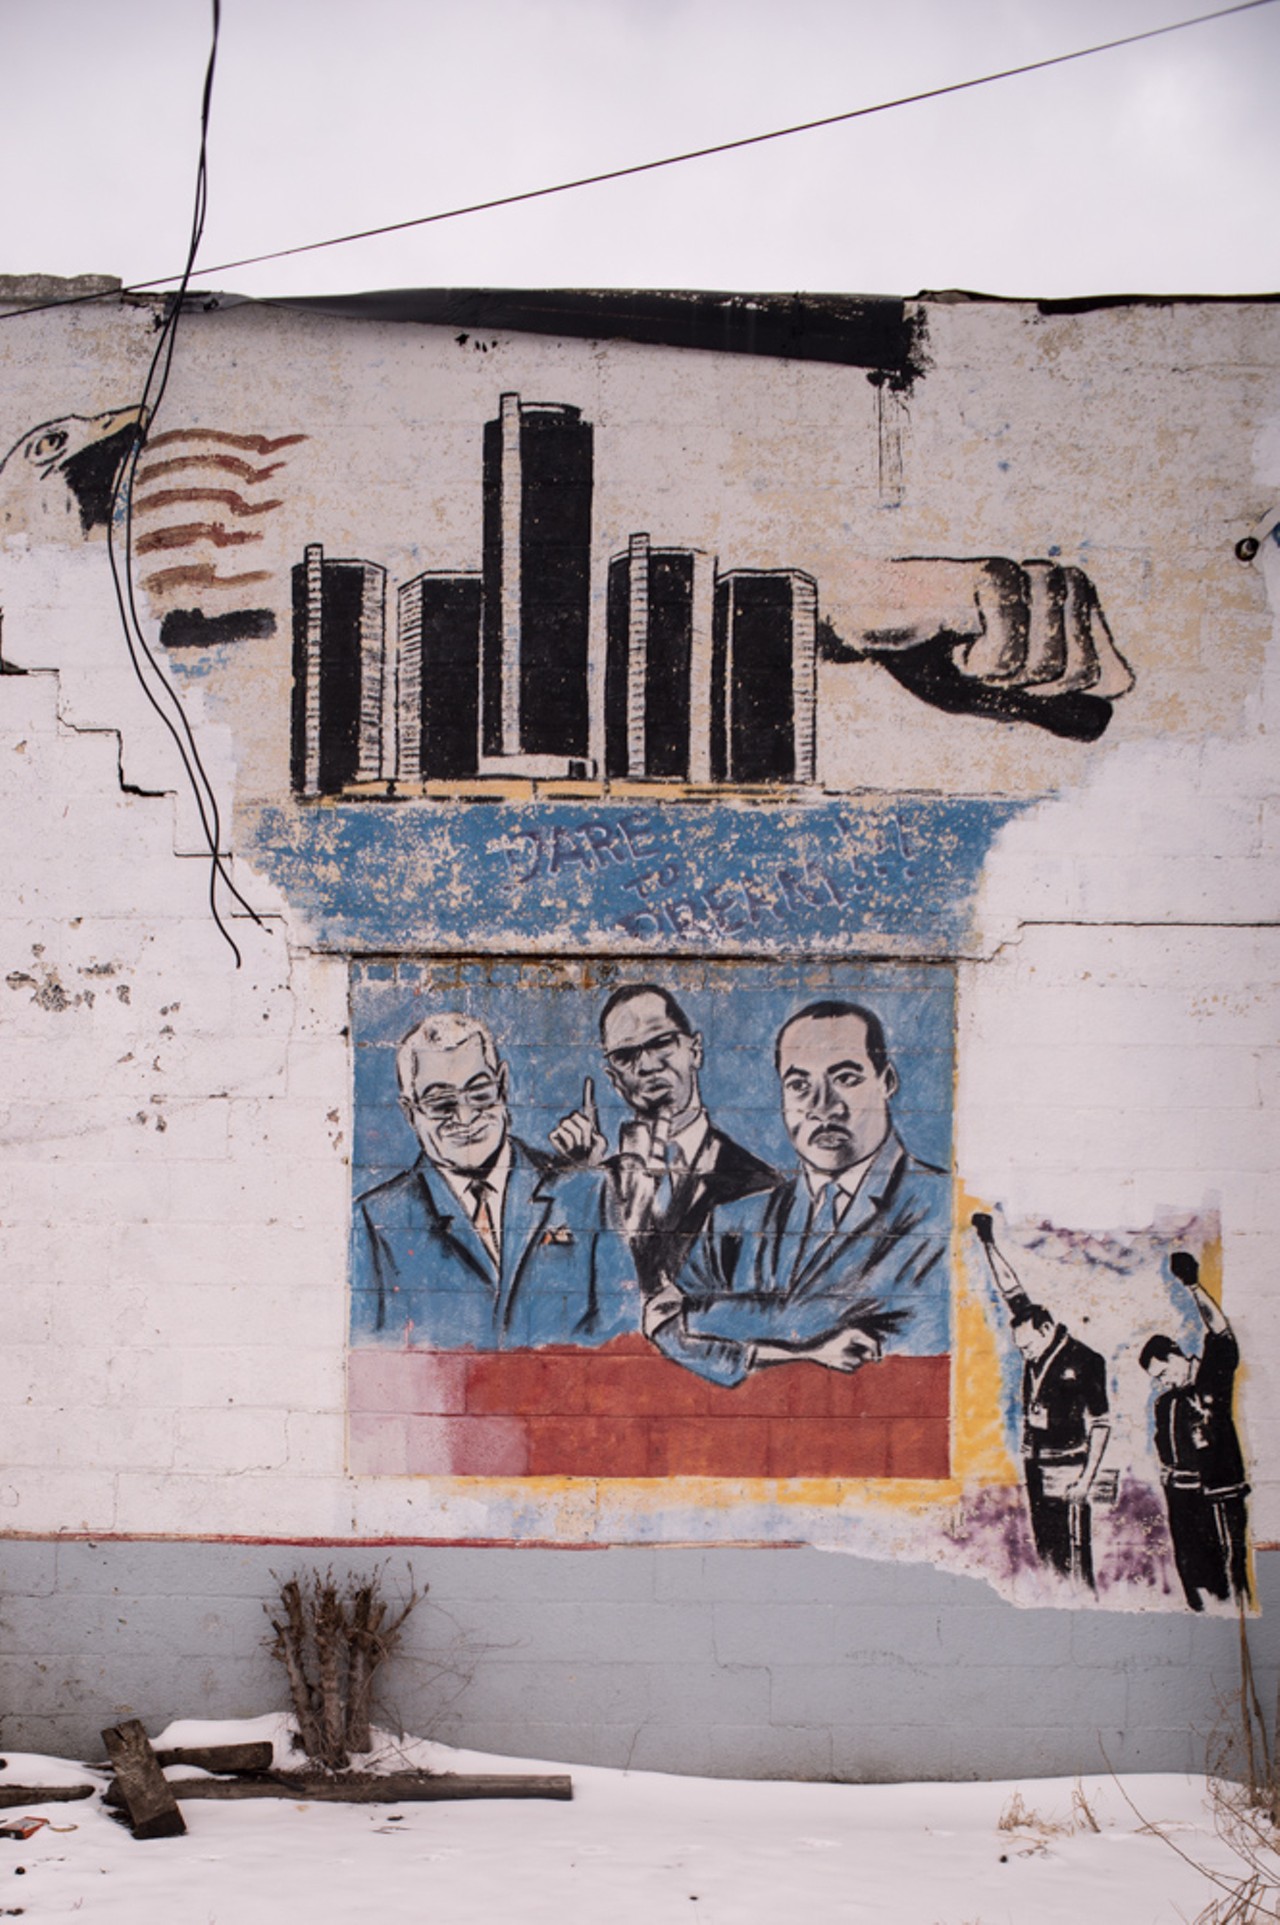 &#147;Dare to Dream&#148; mural depicting Coleman Young, Malcolm X and MLK Jr., as well as gold medallist Tommie Smith and bronze medallist John Carlos making the Black Power salute during the 1968 Mexico City Summer Olympics. Muffler shop, Cloverdale at Elmhurst, Detroit, 2015.